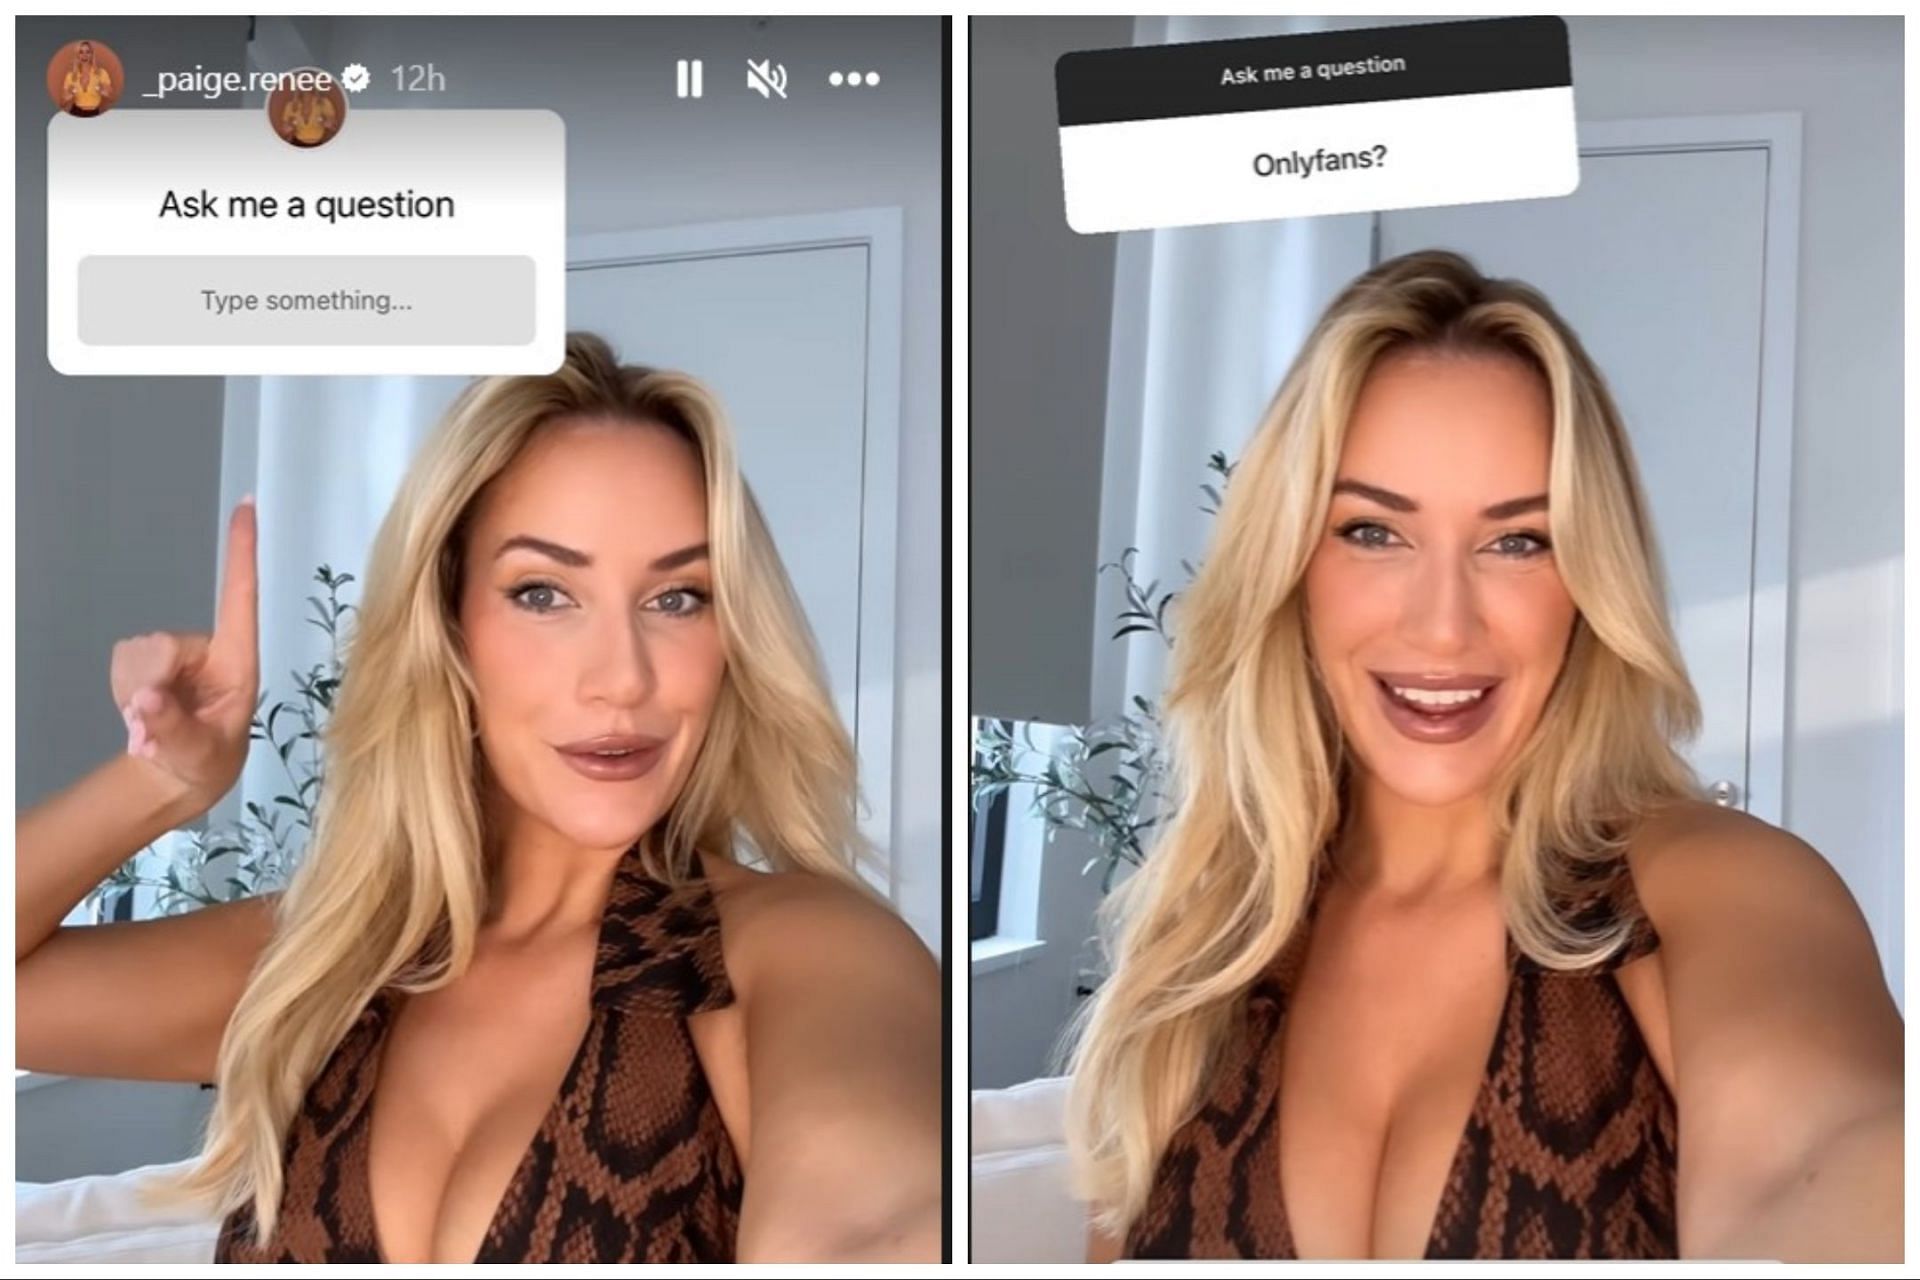 Paige Spiranac recently held a Q&amp;A with her fans on Instagram